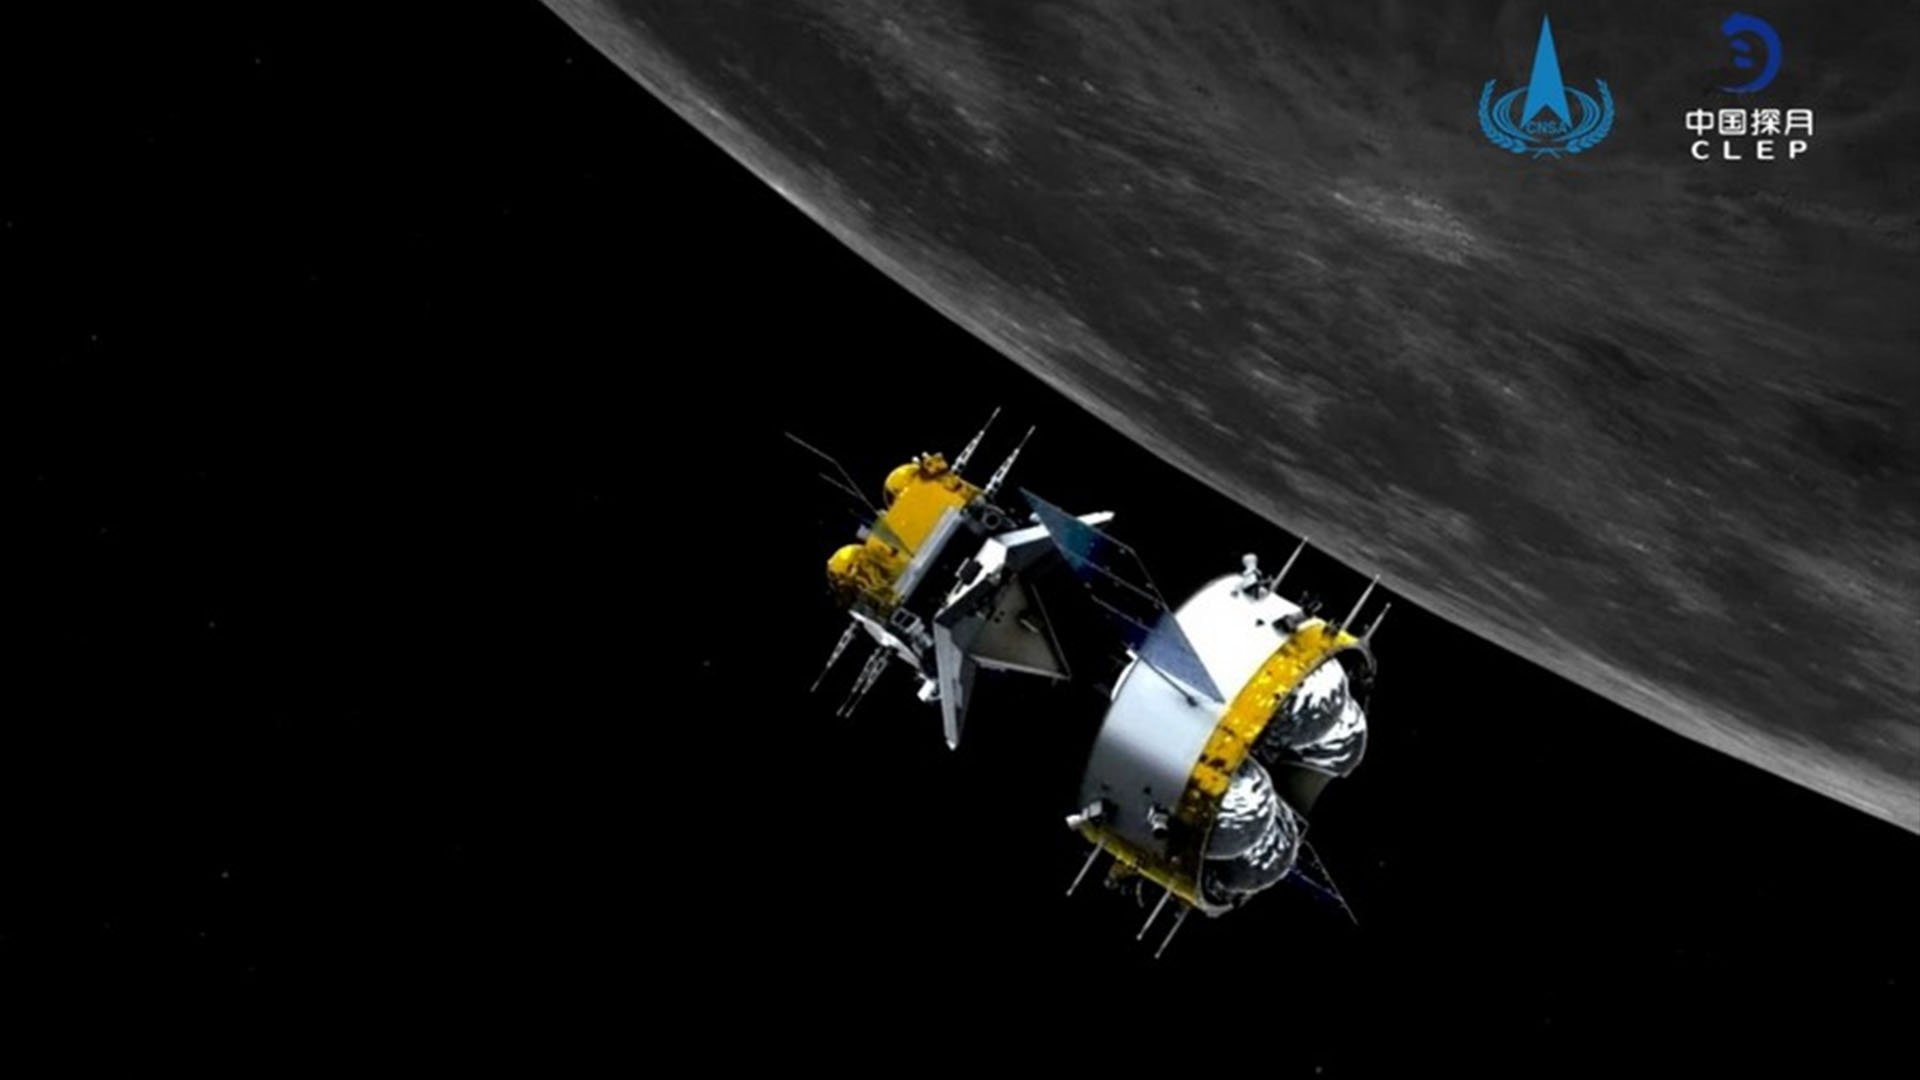 An illustration of China's Chang'e 5 probe near the moon.